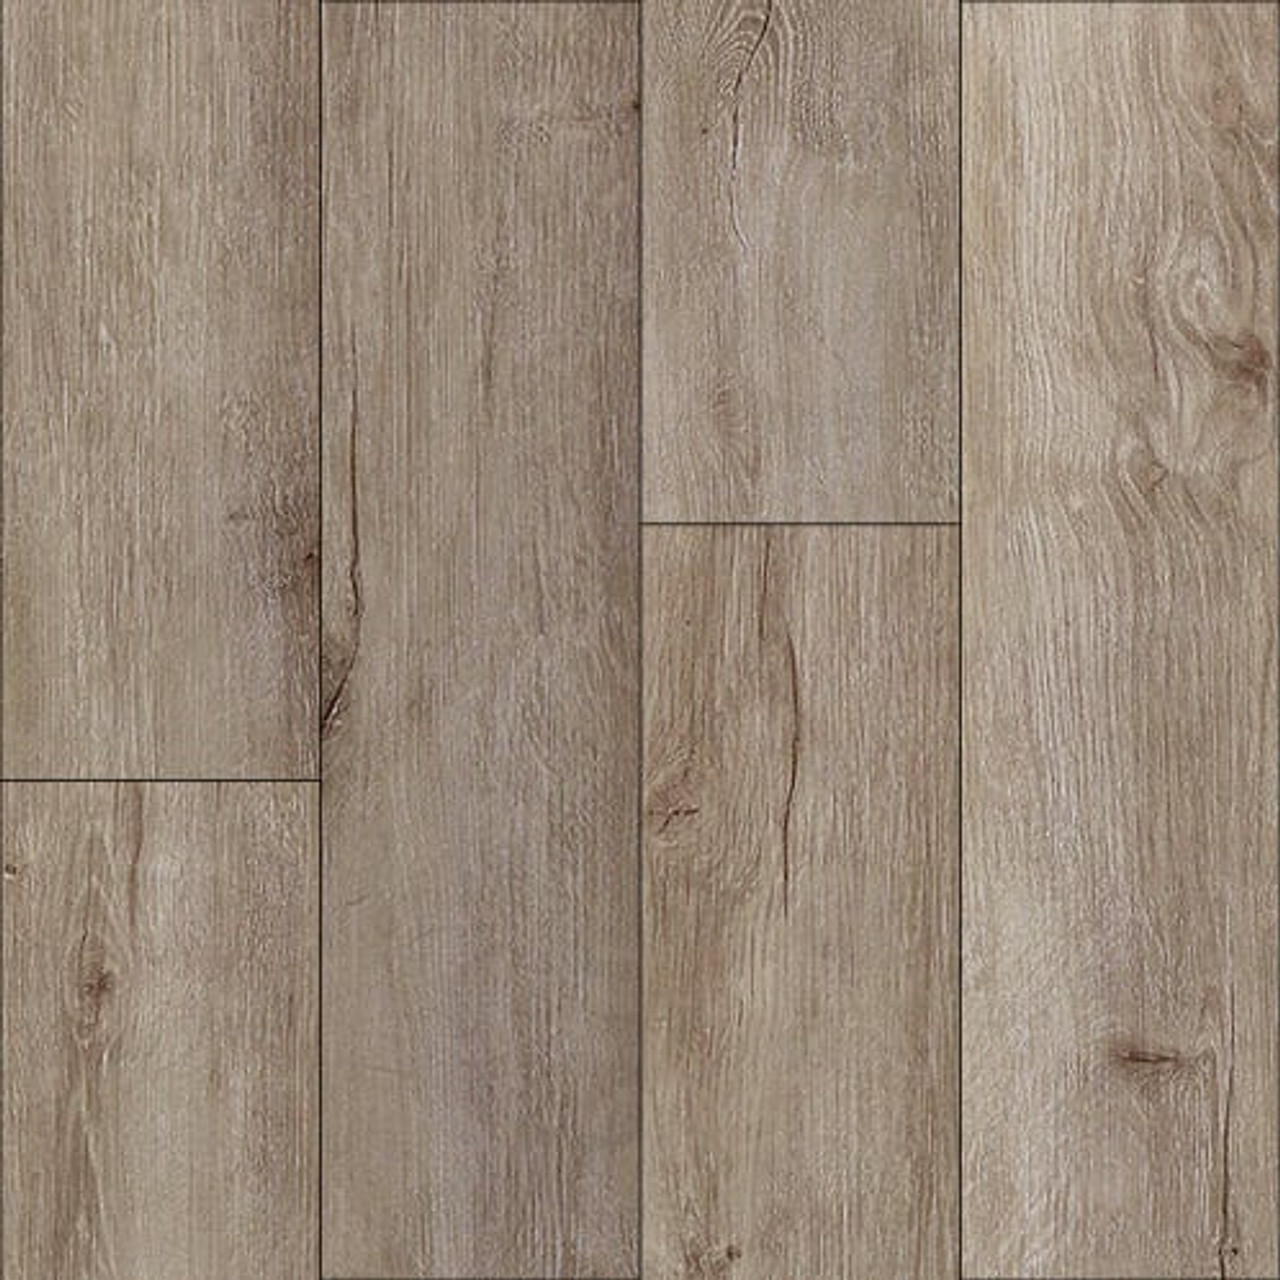 Southwind | Harbor Plank | LVP | Waterproof | 21 Colors in The Series | 6  X 48 | 15.76 SF / Box